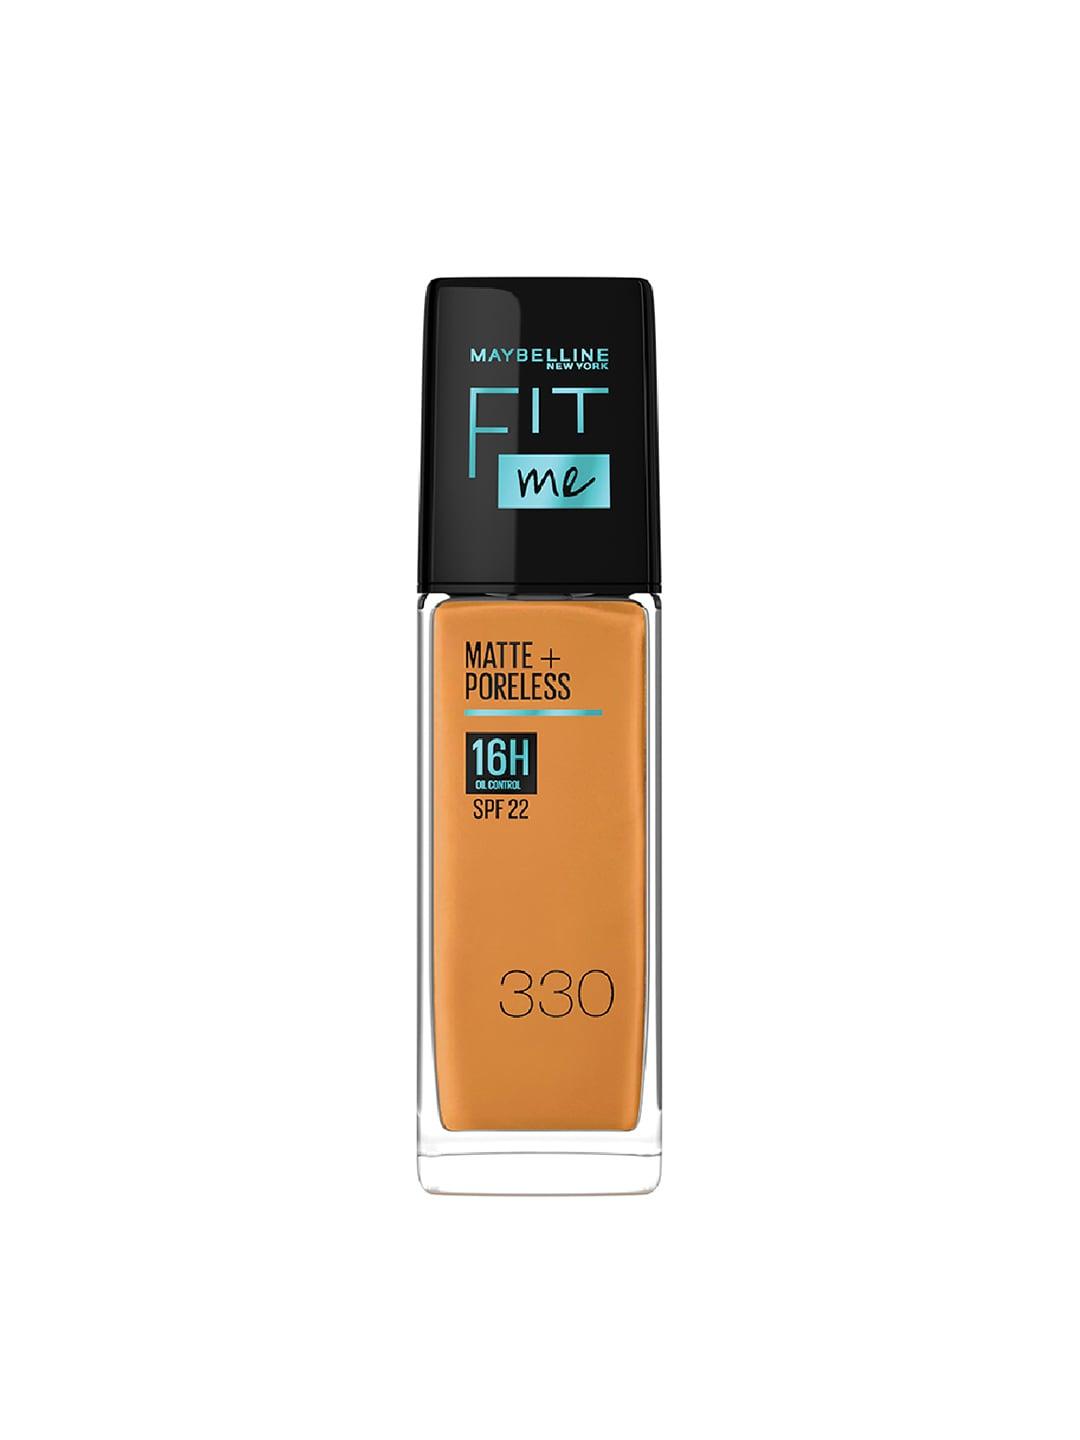 maybelline new york fit me normal to oily matte poreless foundation - toffee 330 30 ml